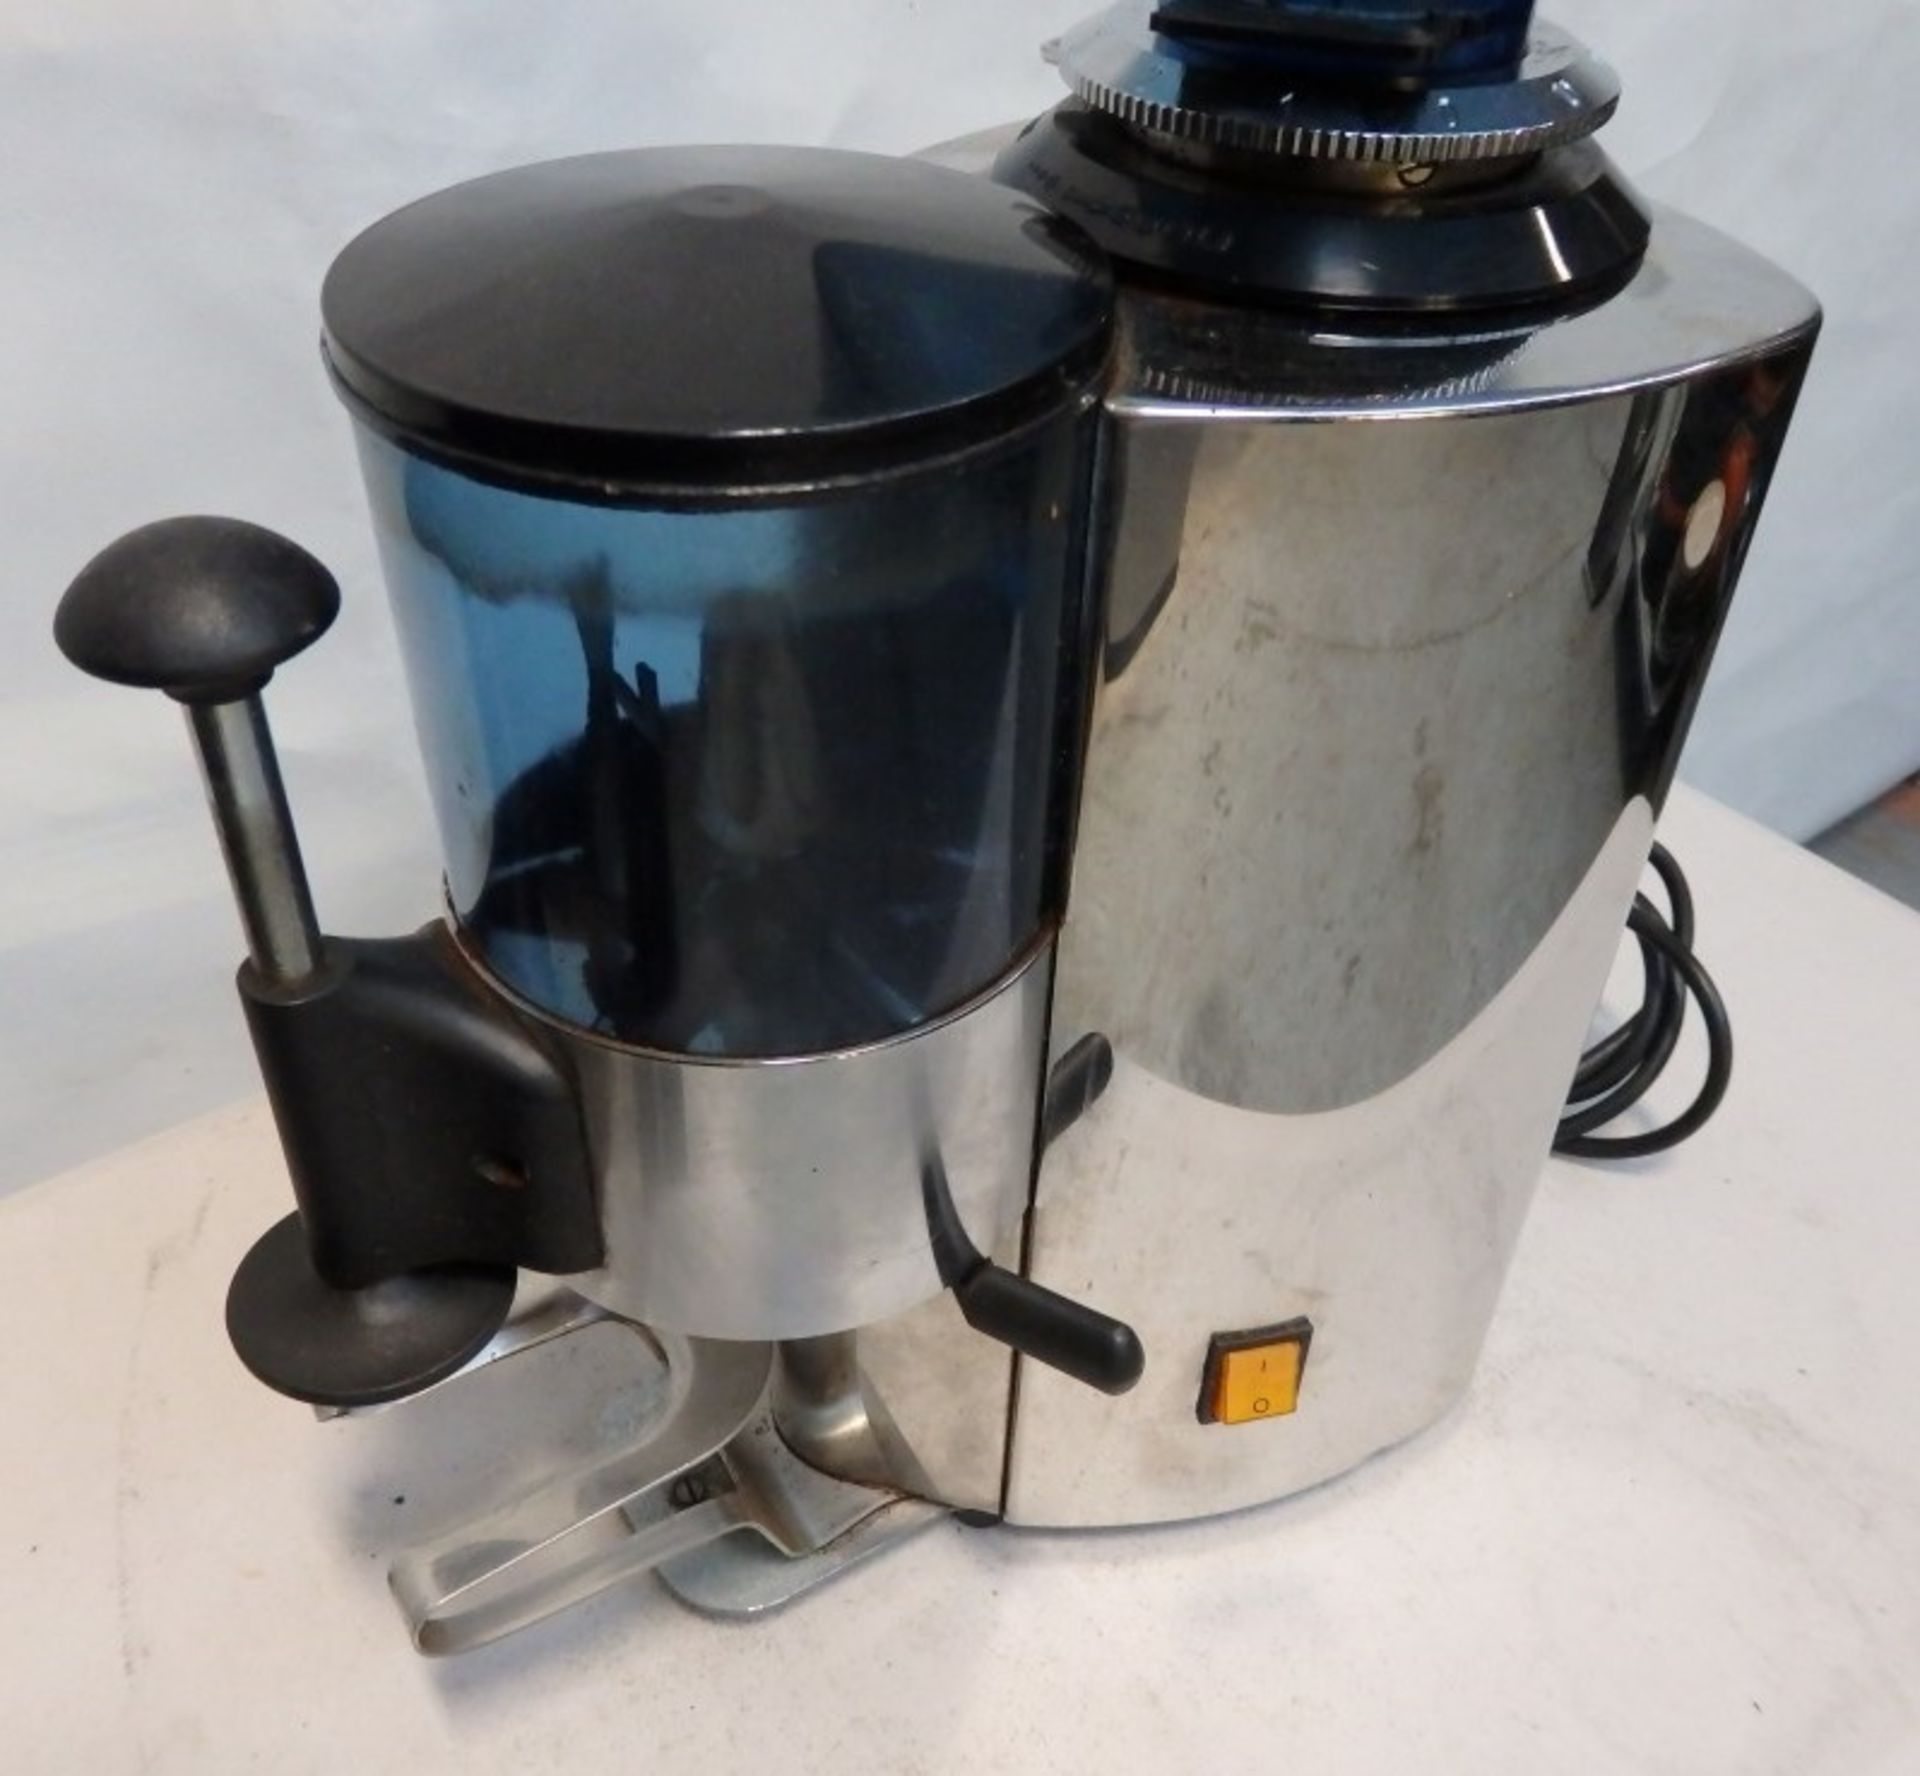 1 x Bezzera Commercial Coffee Grinder (Model BB003) - Stainless Steel AISI 304 Body - Capacity: - Image 4 of 8